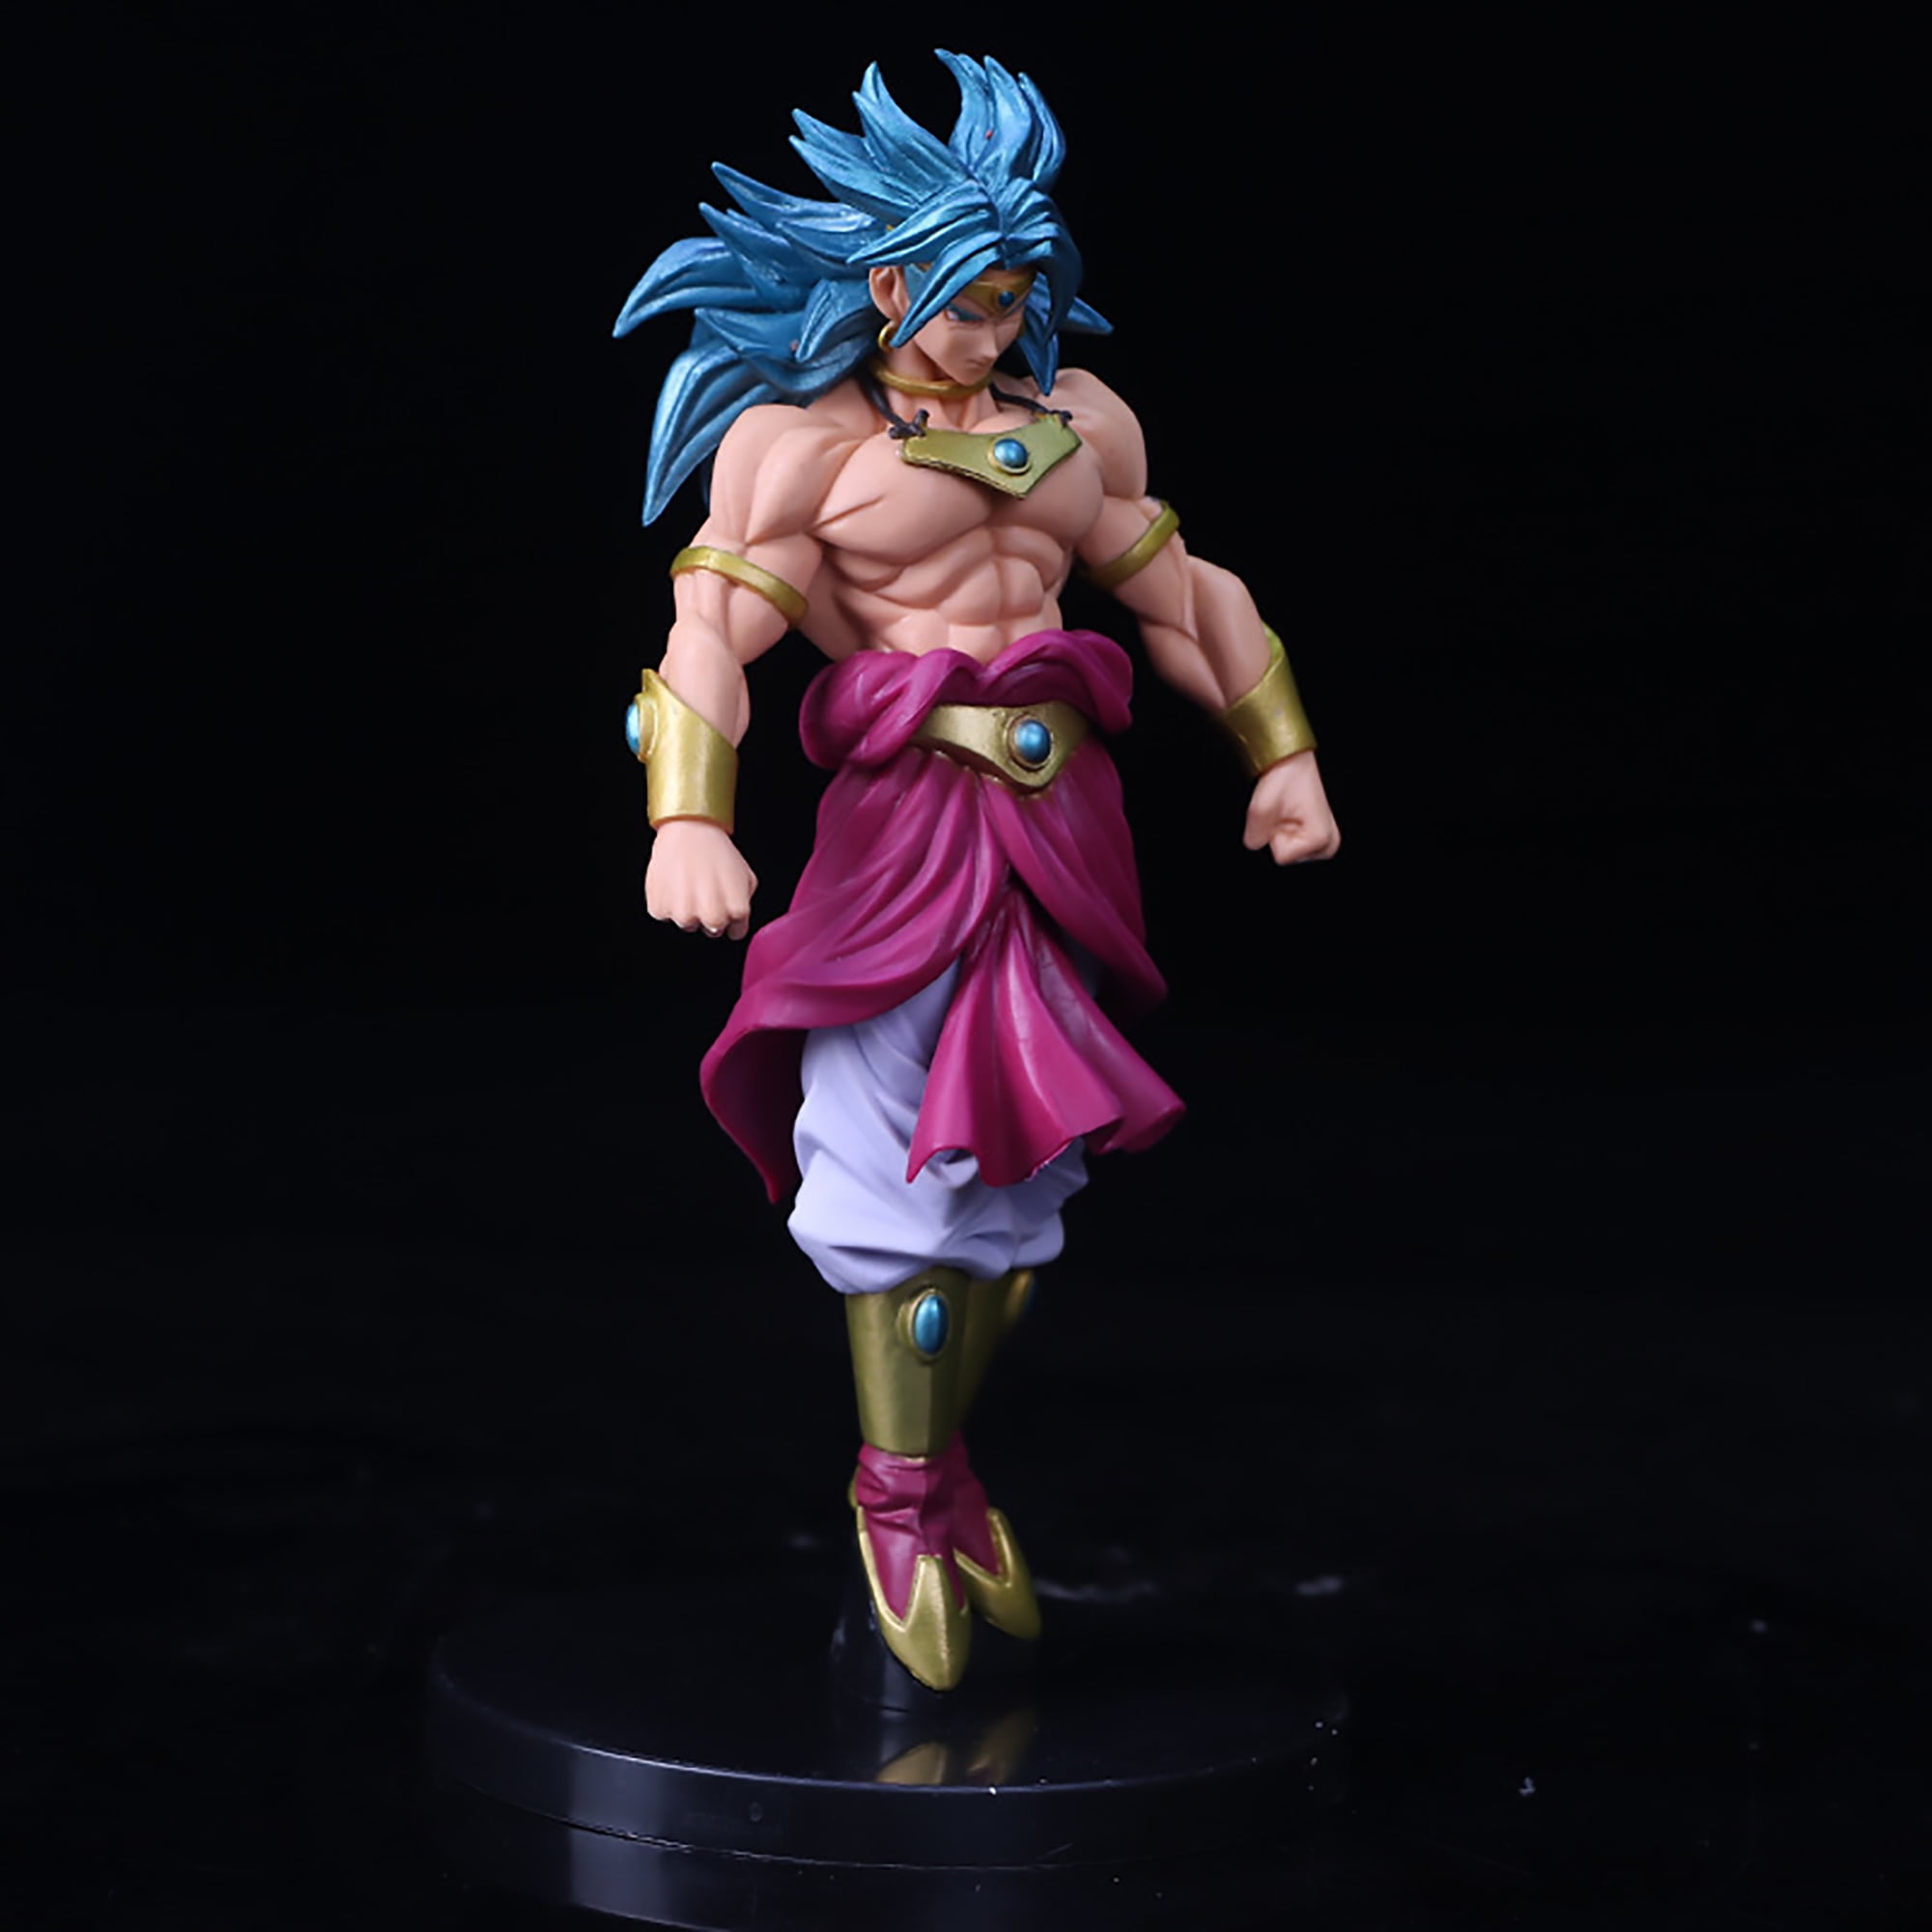 Banpresto Boys Dragon Ball Z Sculptures Big Budoukai 7 vol.3 Figure  Collection - Broly - Broly Action Figure for 180 months to 1000 months